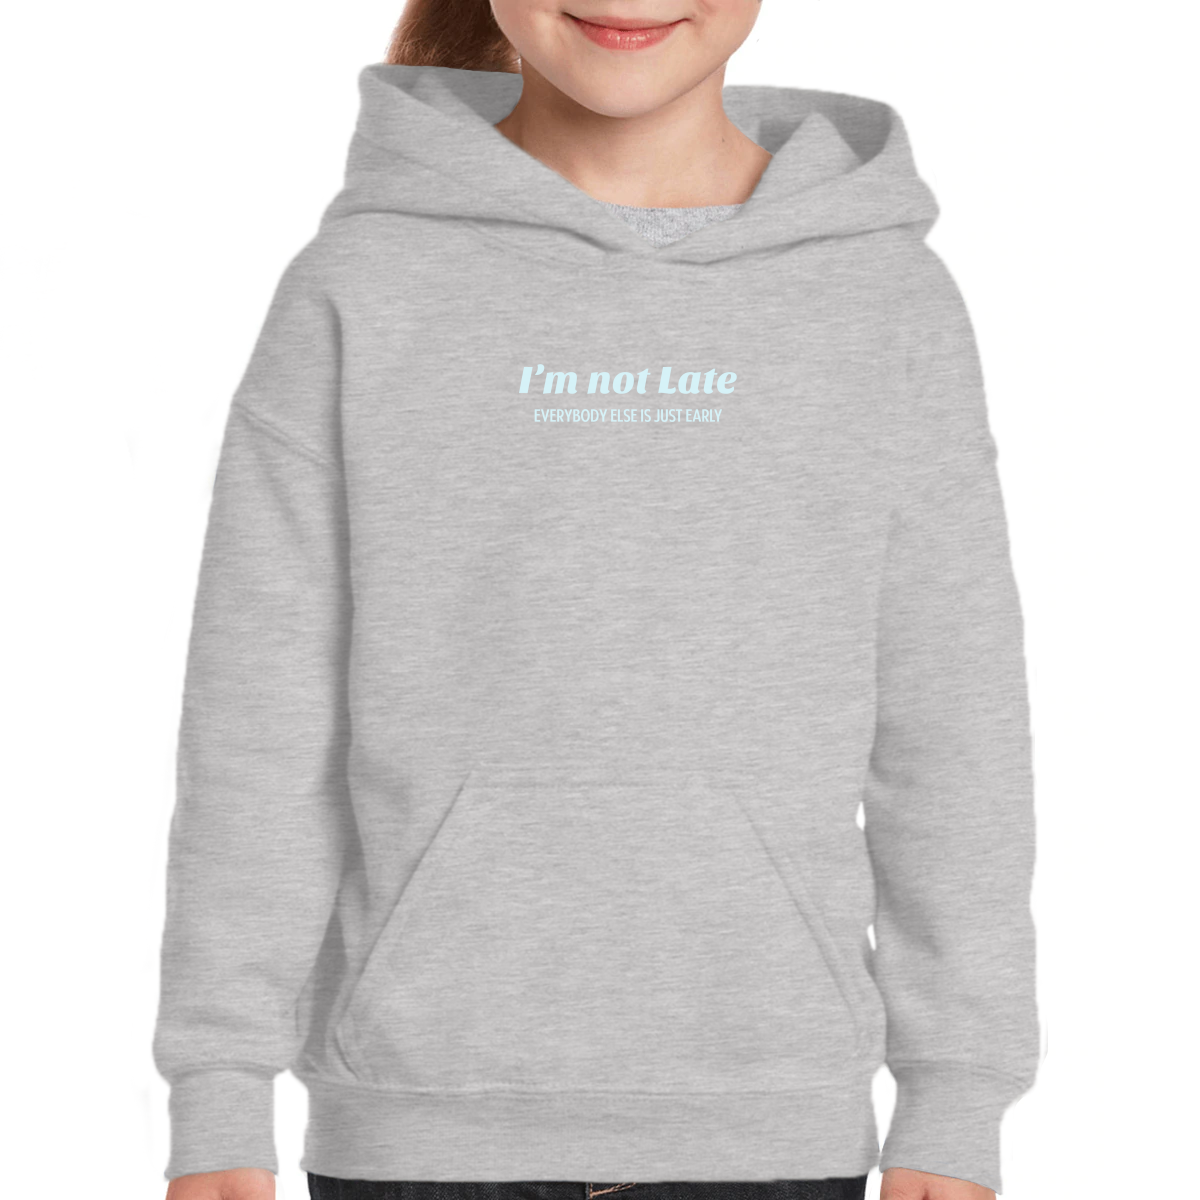 I’m not late everybody else is just early Kids Hoodie | Gray